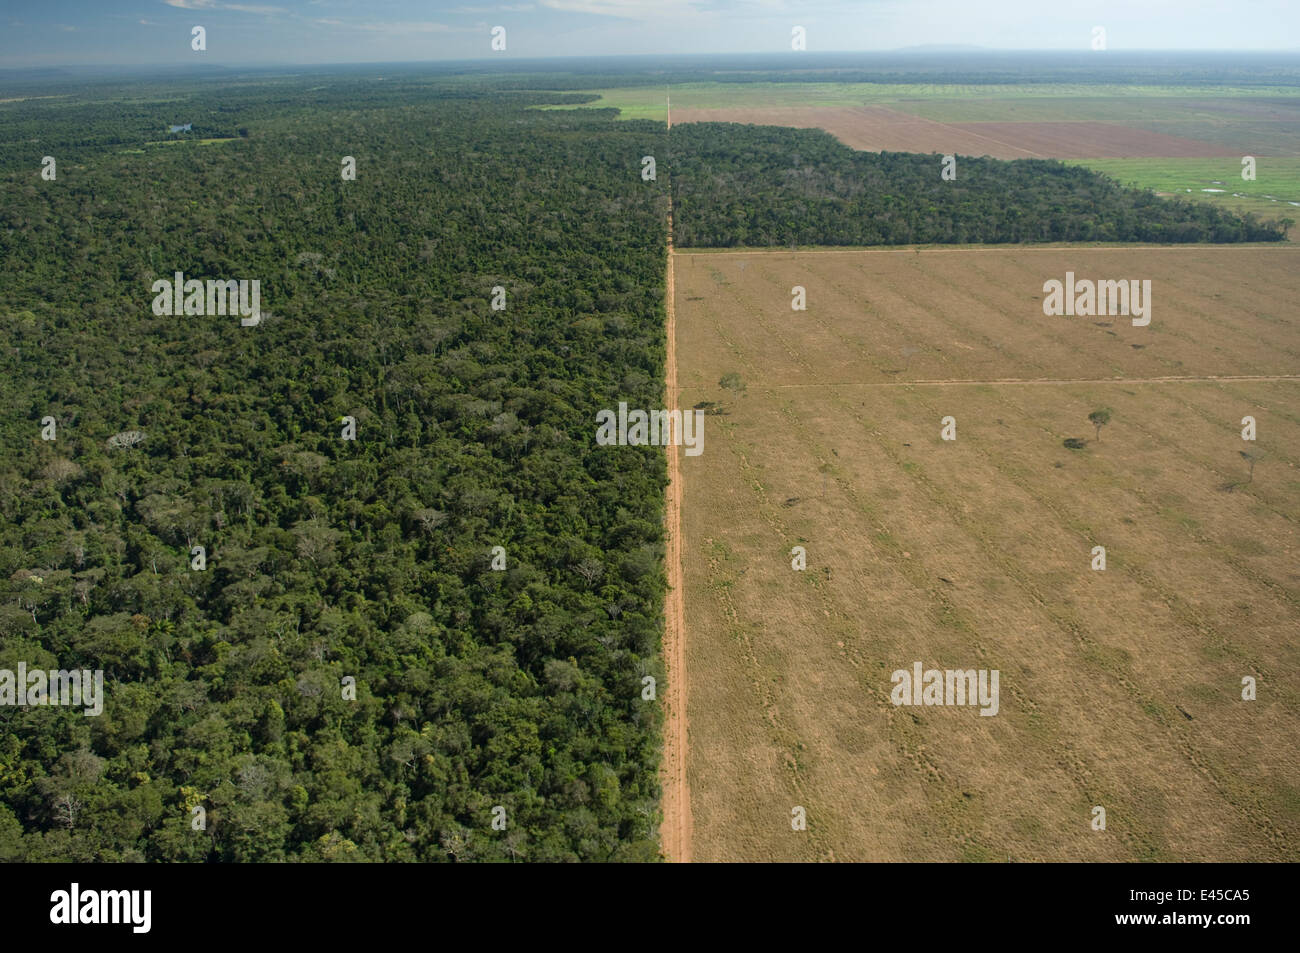 Aerial view of cattle pasture land created from tropical rainforest, Western Mato Grosso State, Western Brazil. Stock Photo